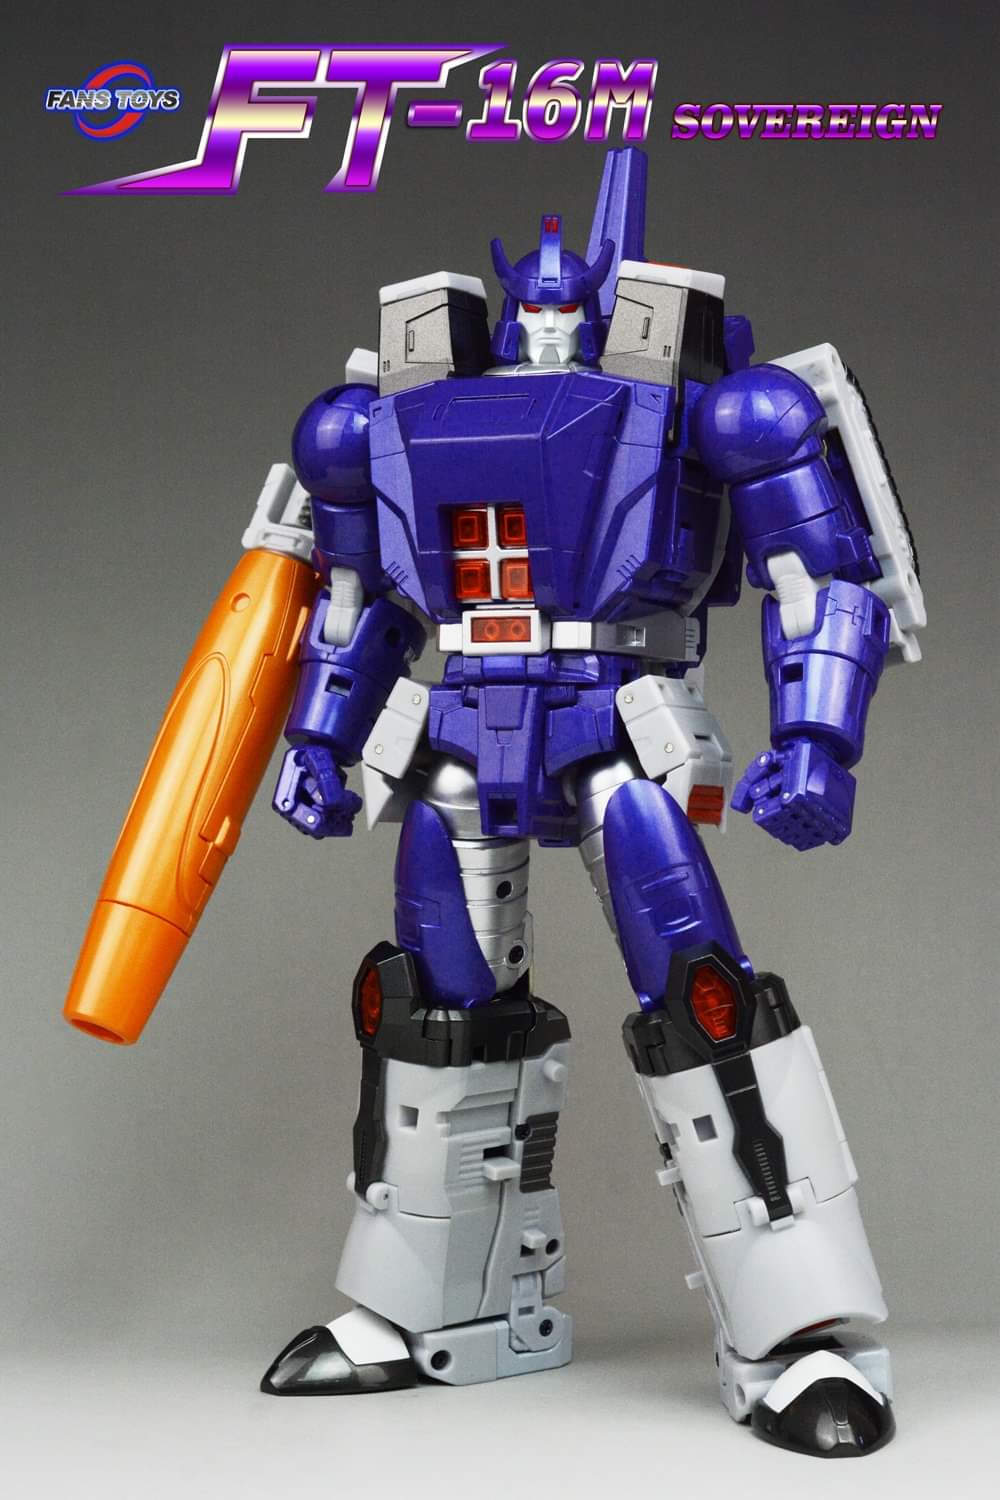 [Fanstoys] Produit Tiers - FT-16 Sovereign - aka Galvatron - Page 4 CHh2XAPl_o